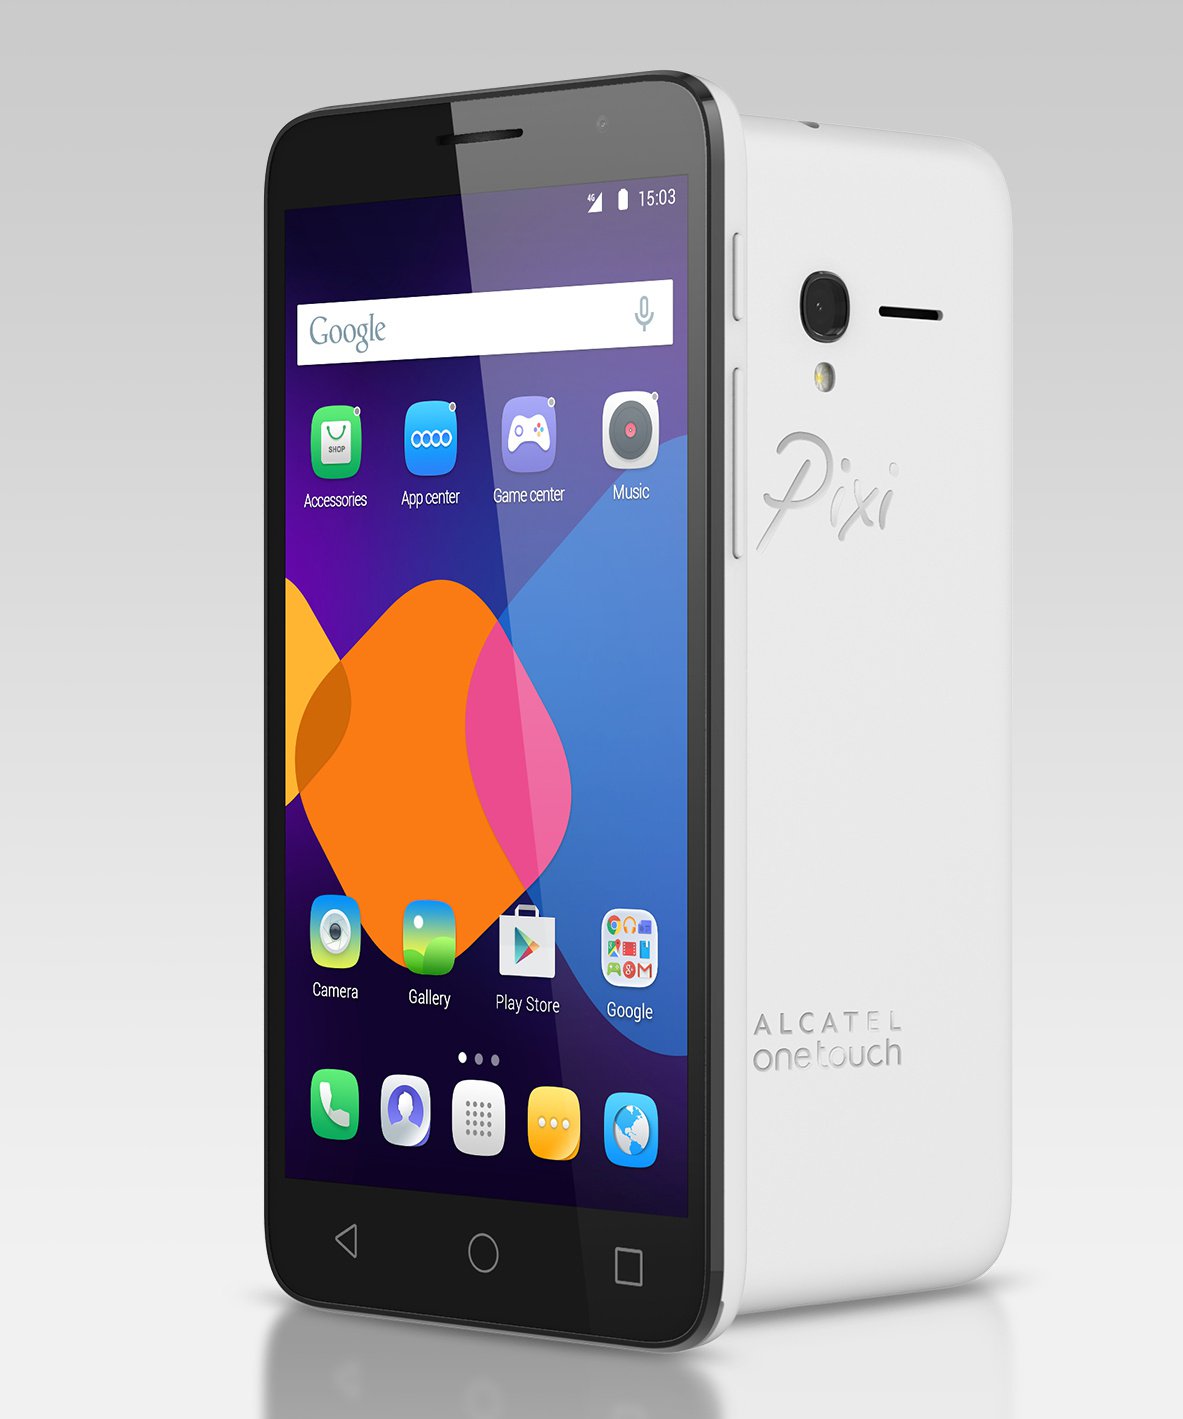 Alcatel one touch 3